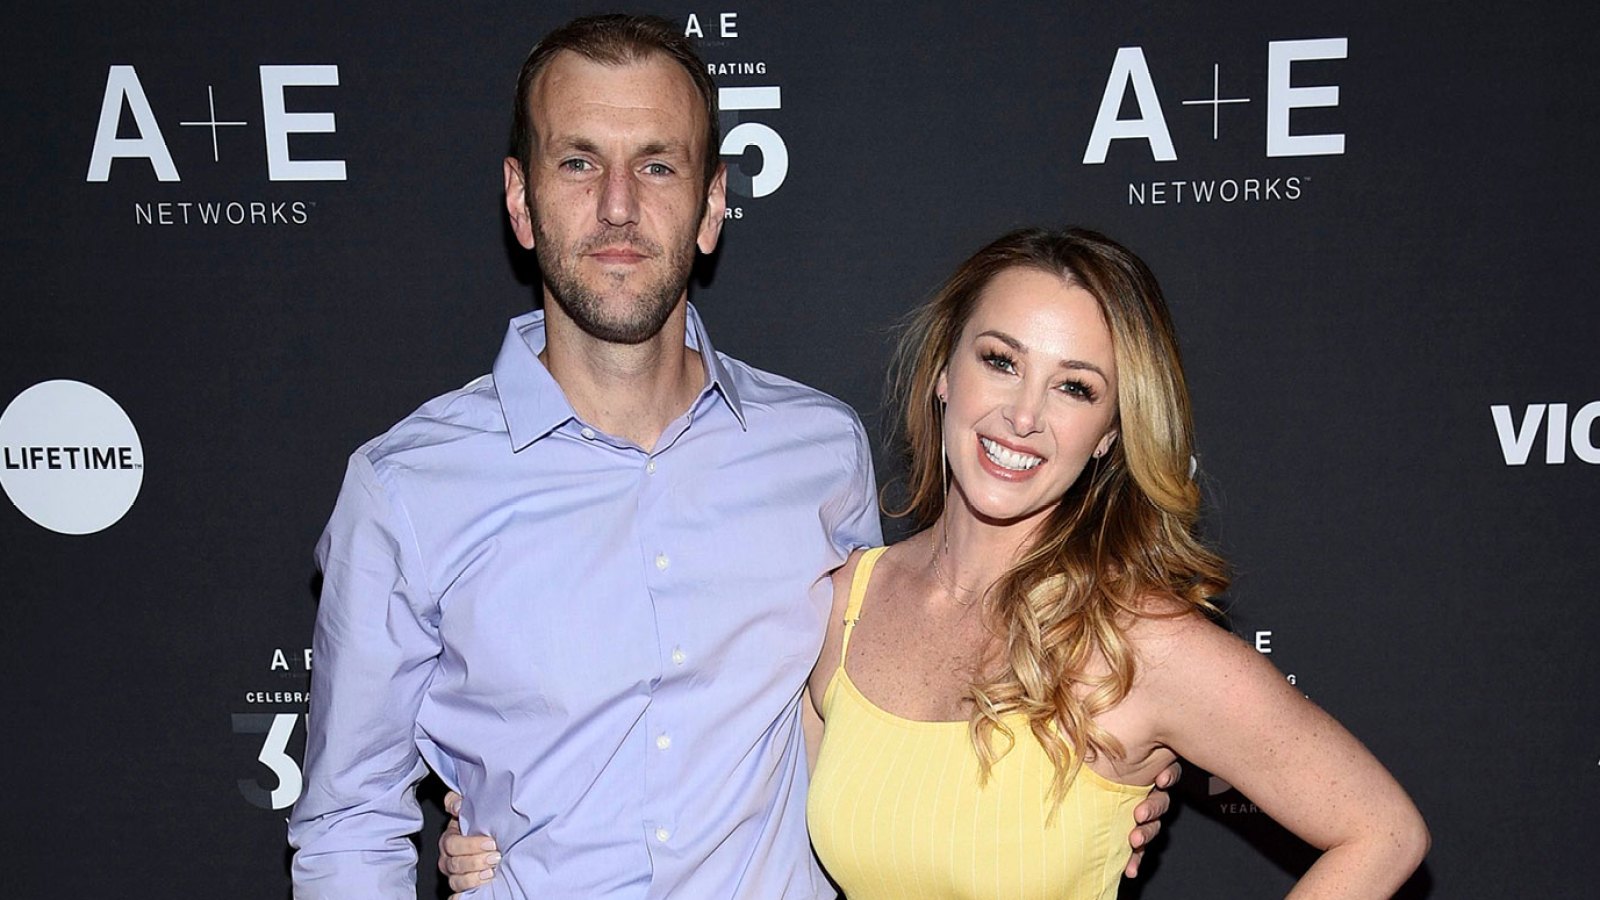 Married at First Sight Jamie Otis Is Fighting to Save Marriage to Doug Hehner